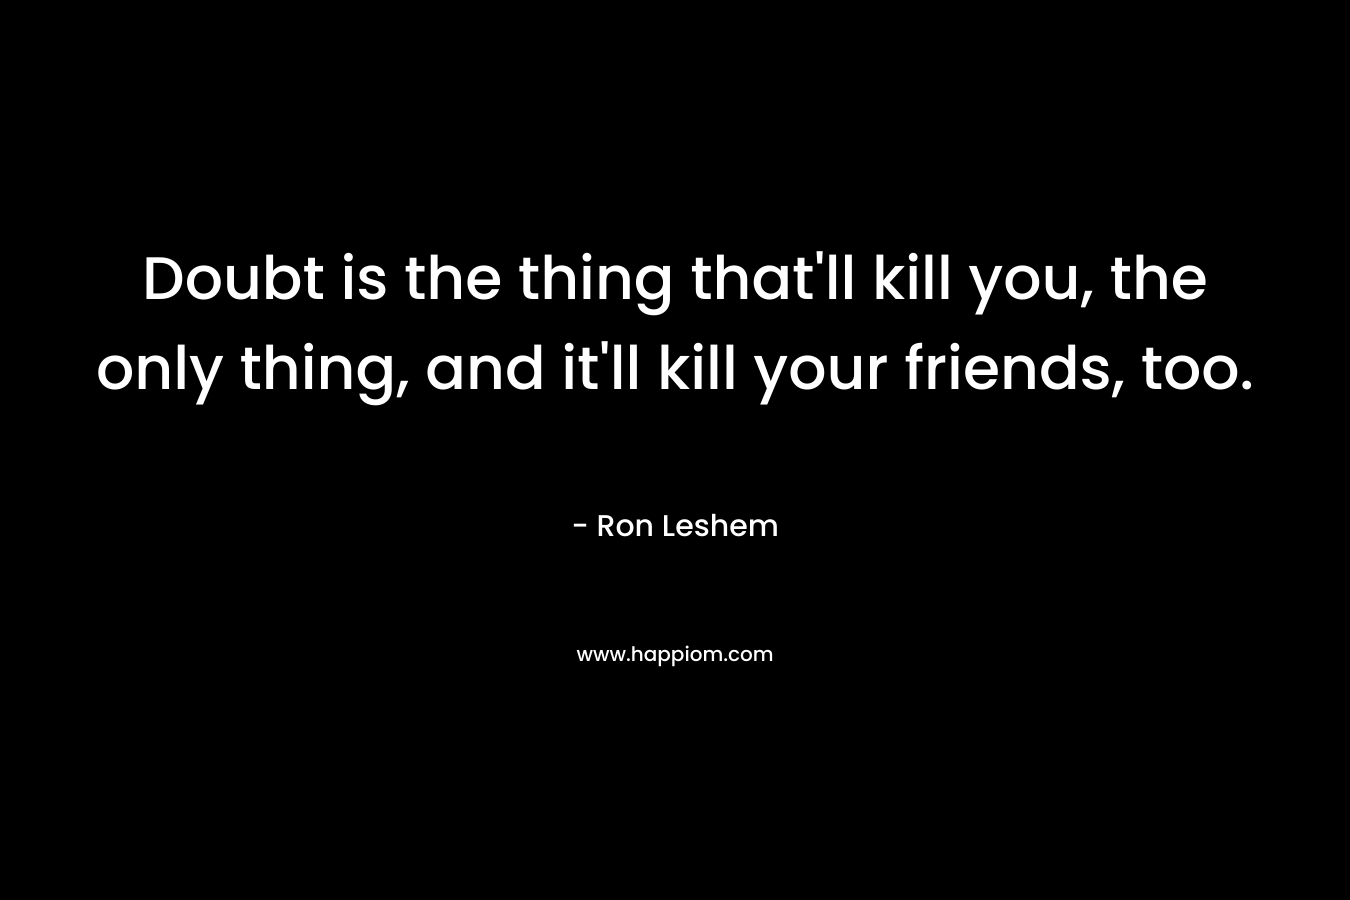 Doubt is the thing that’ll kill you, the only thing, and it’ll kill your friends, too. – Ron Leshem